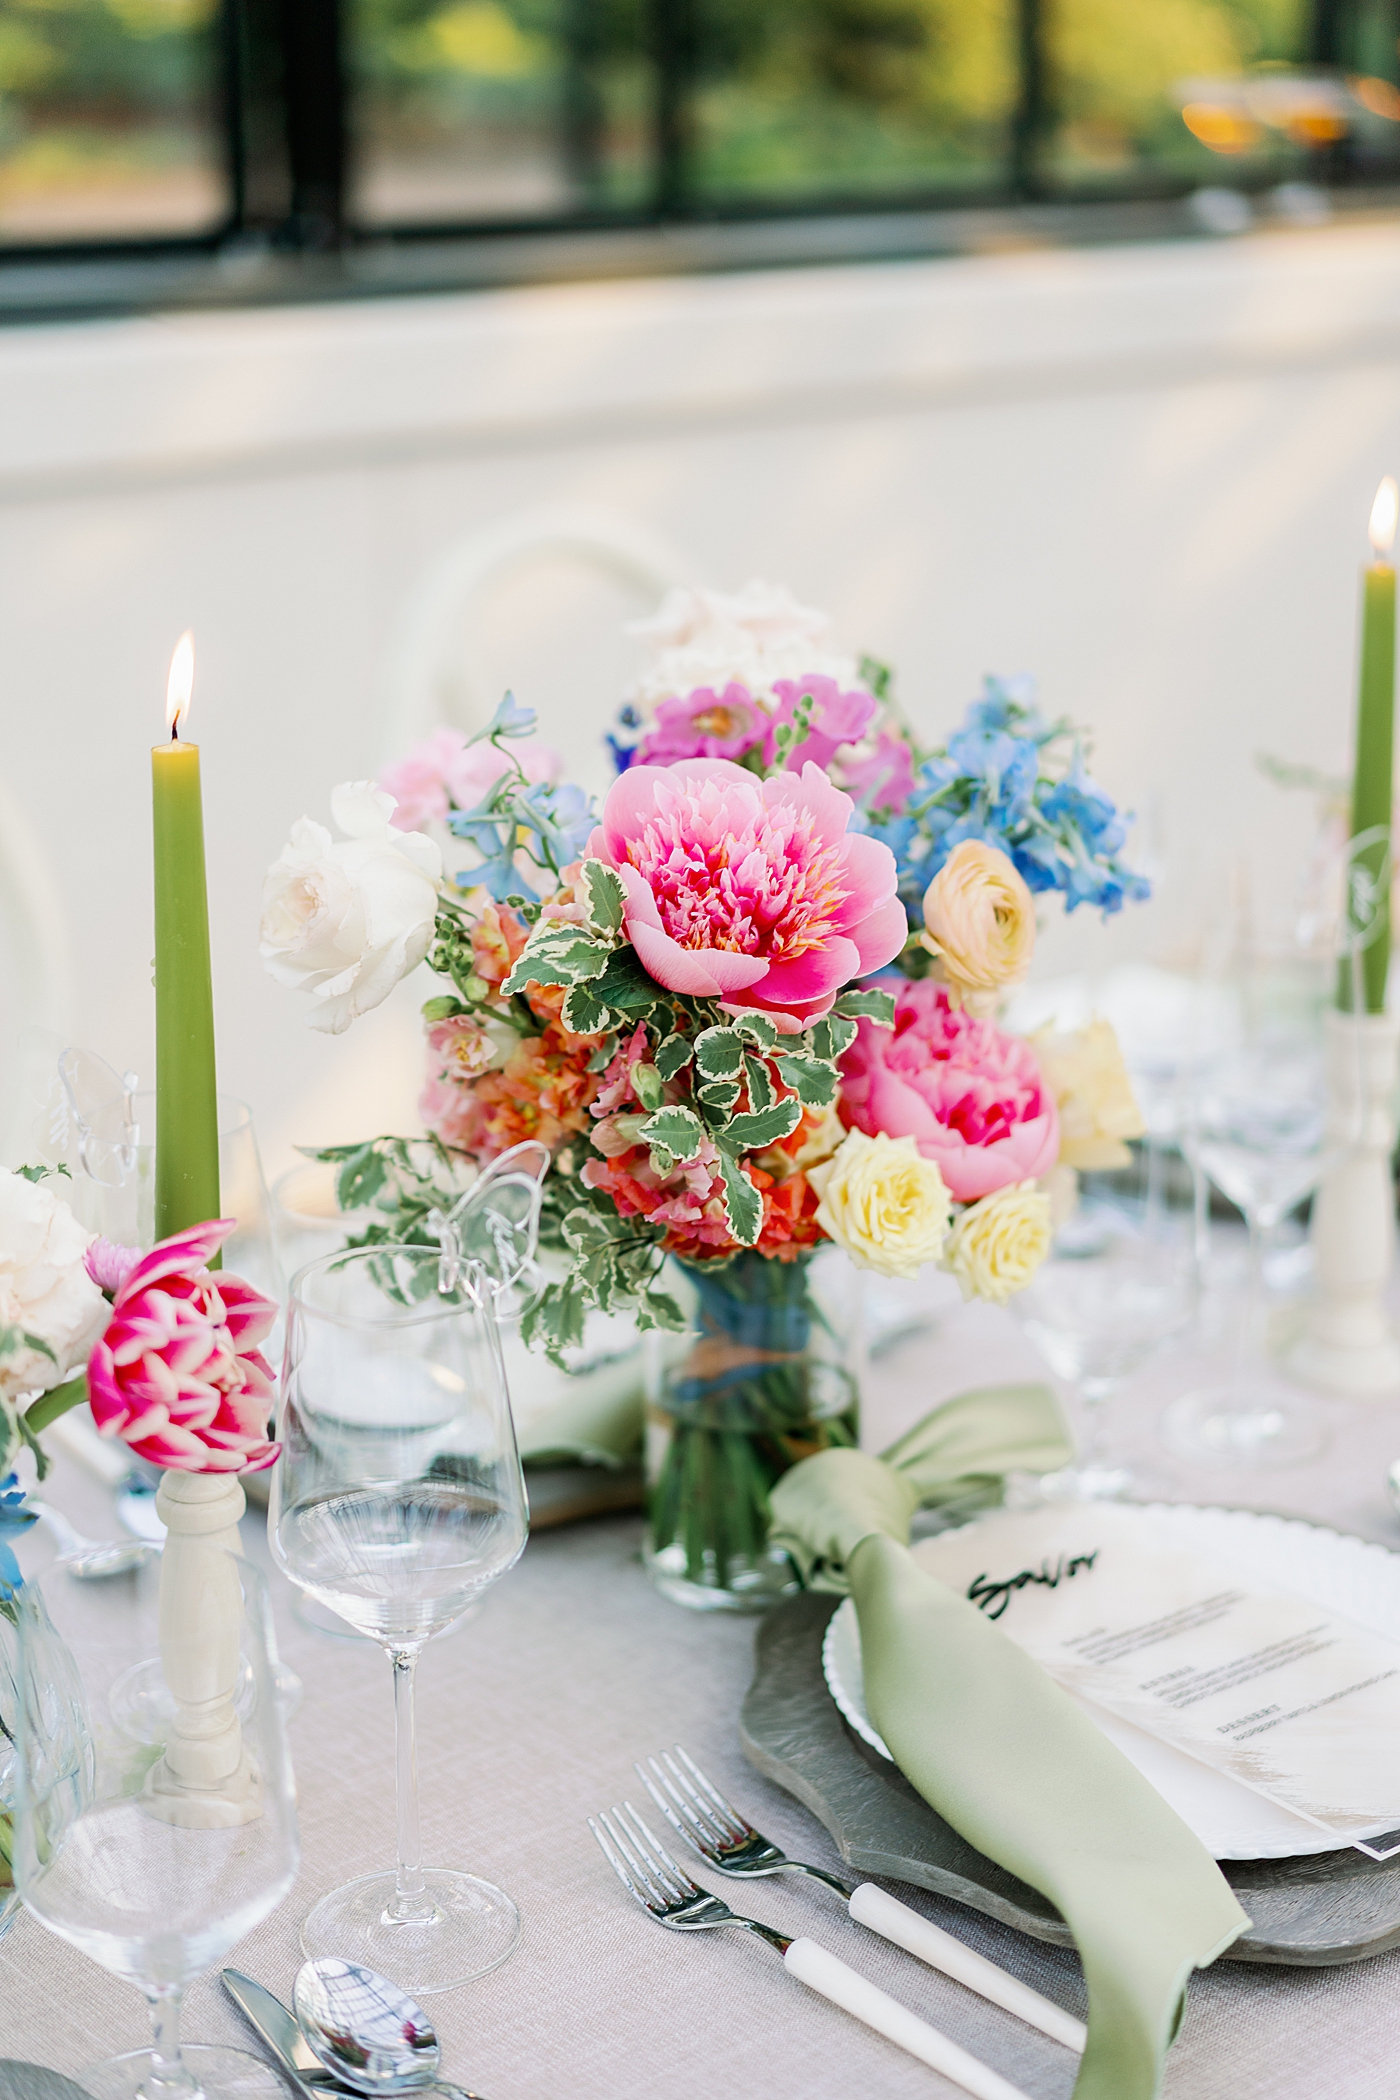 Table setting with colorful florals during summer inspired garden wedding| Photo by Annie Laura Photo